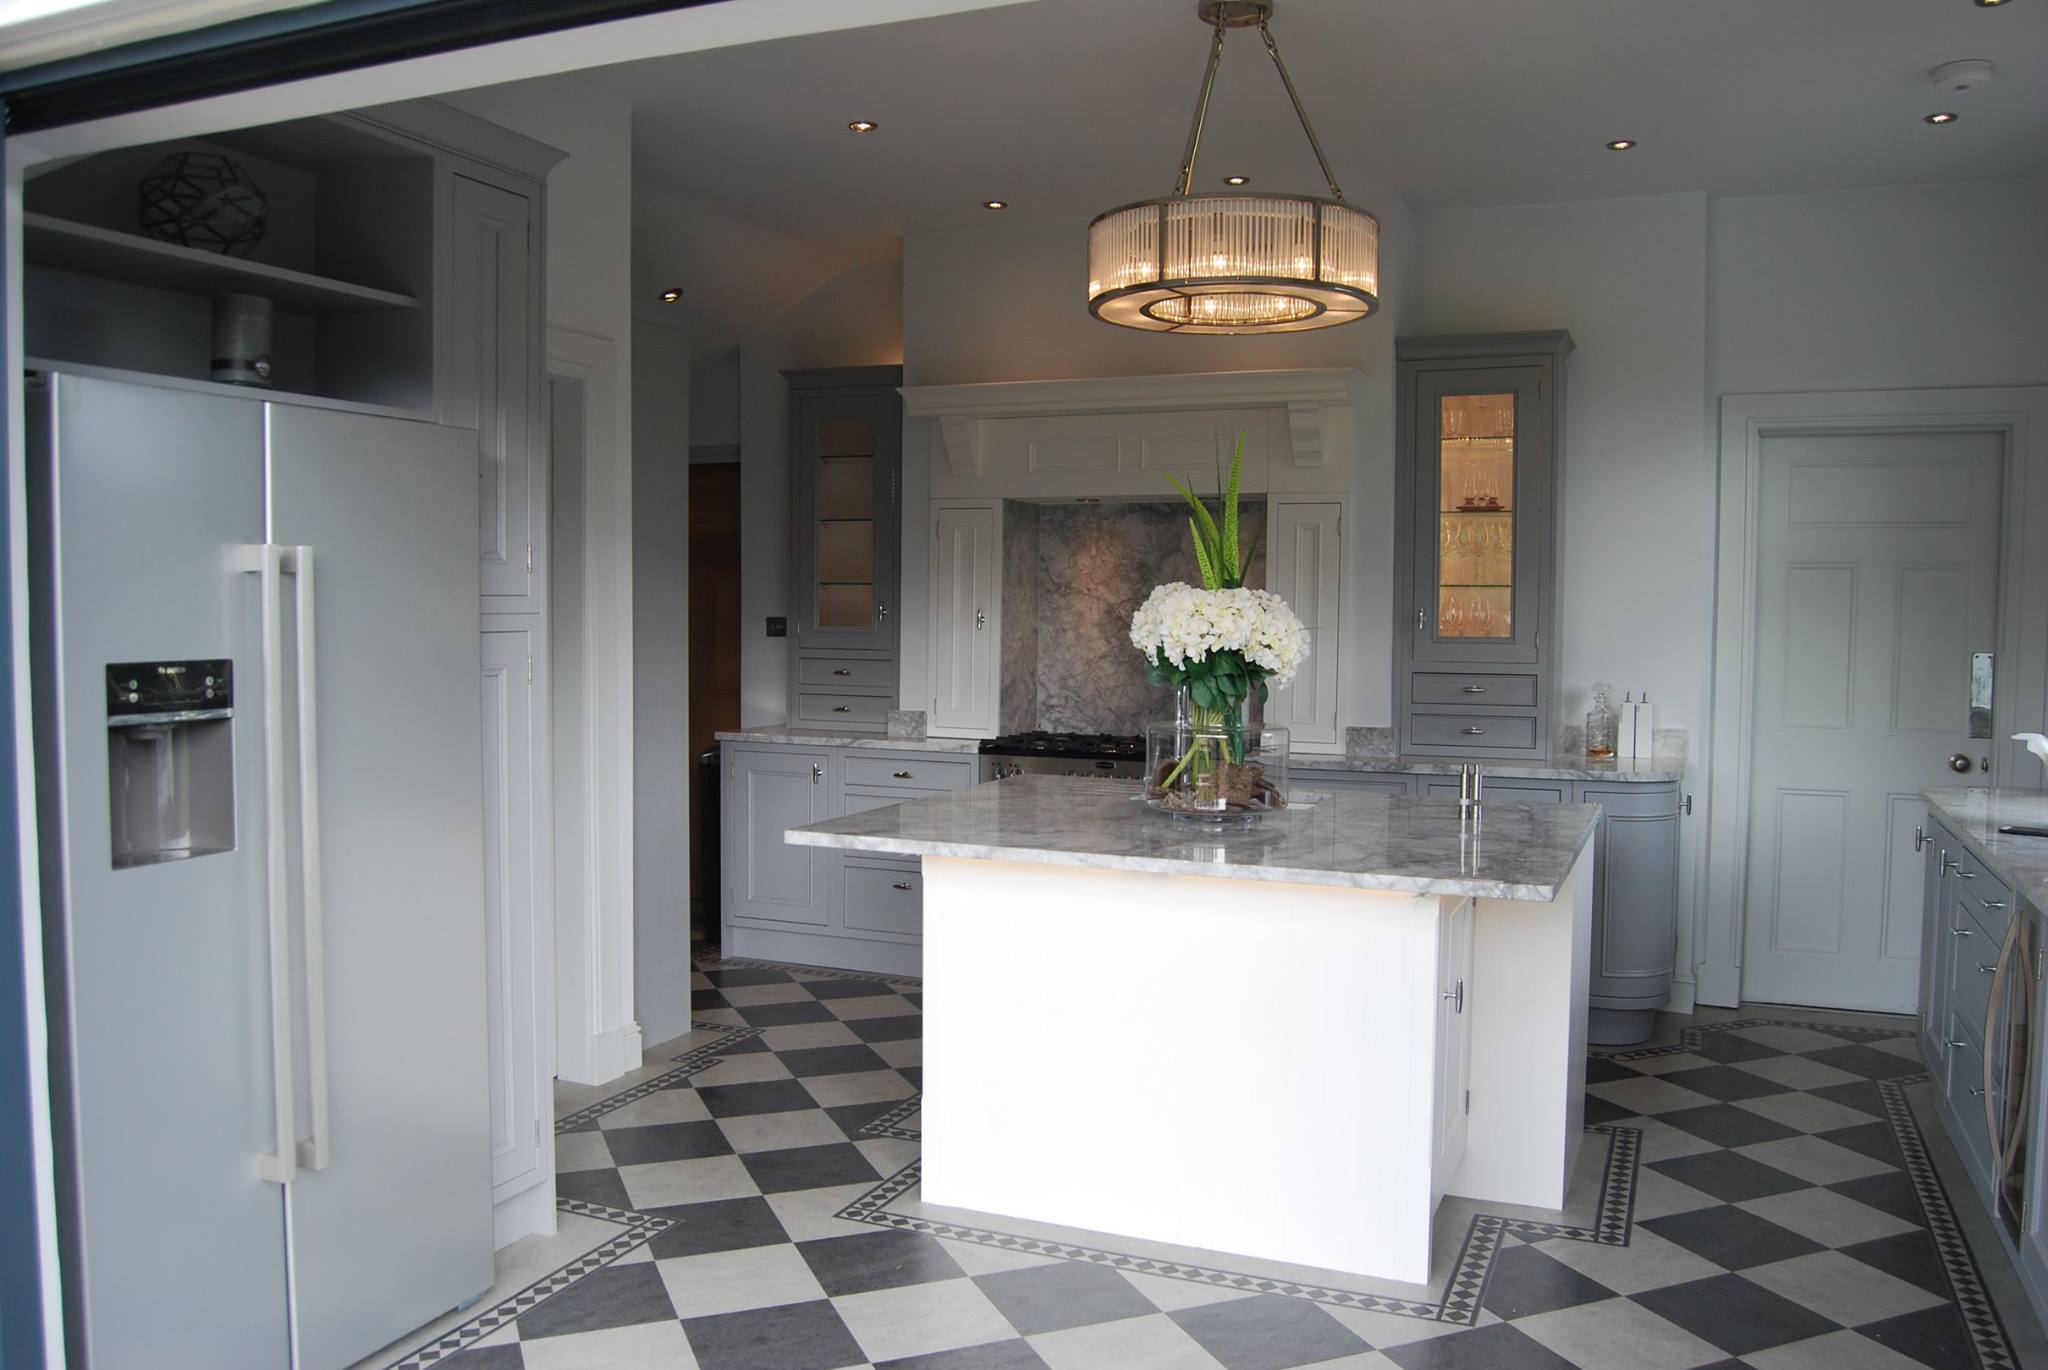 Previous Kitchen Fitting And Kitchen Design Work That Mulberry